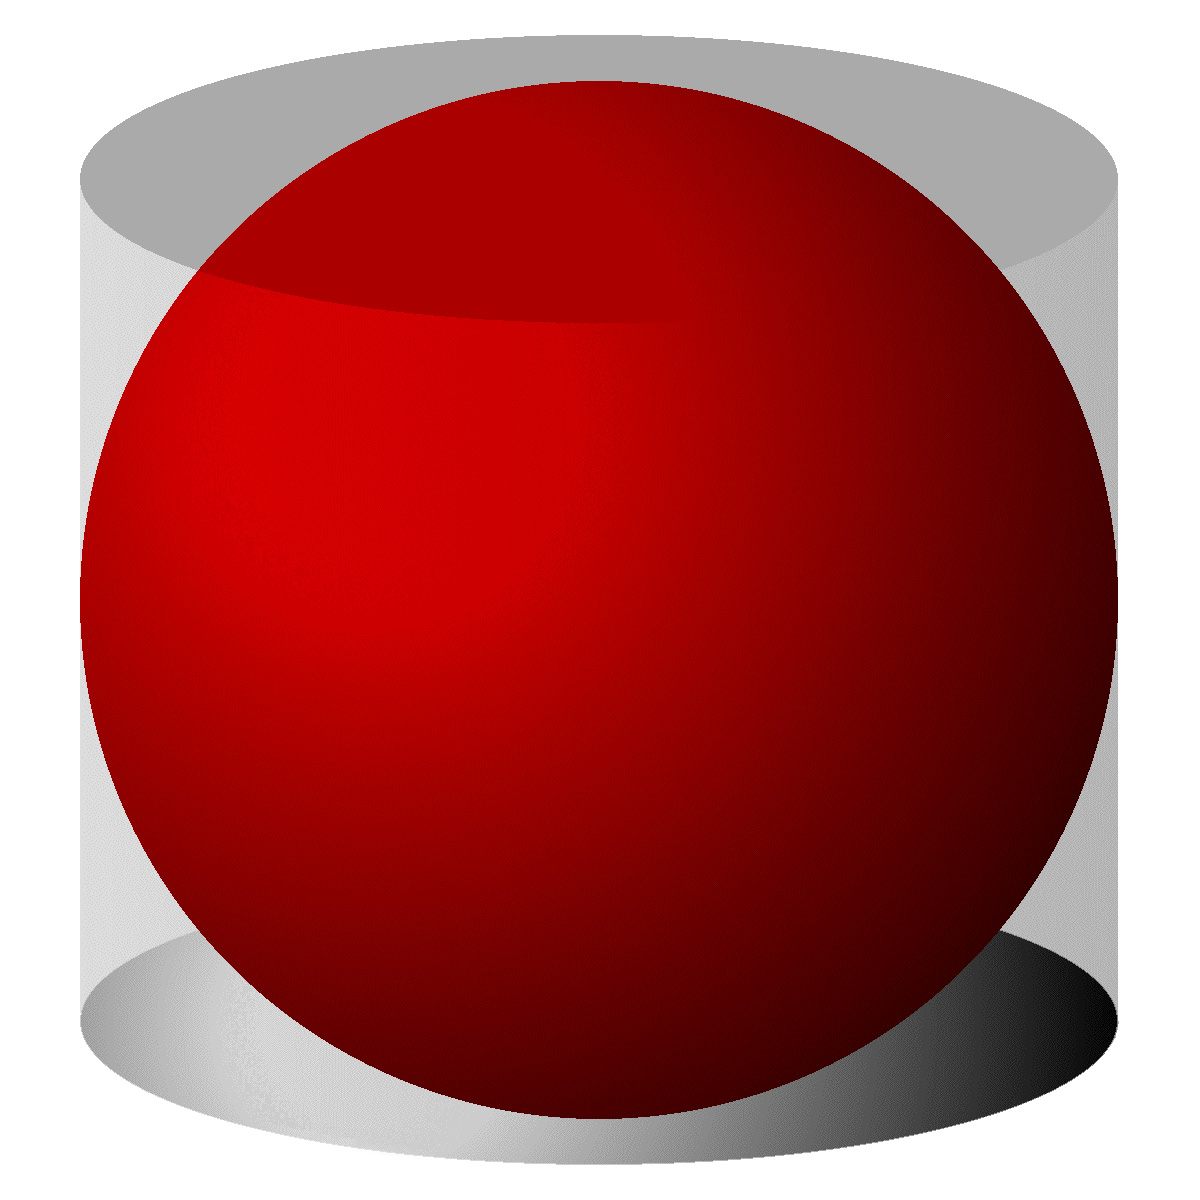 Archimedes Sphere